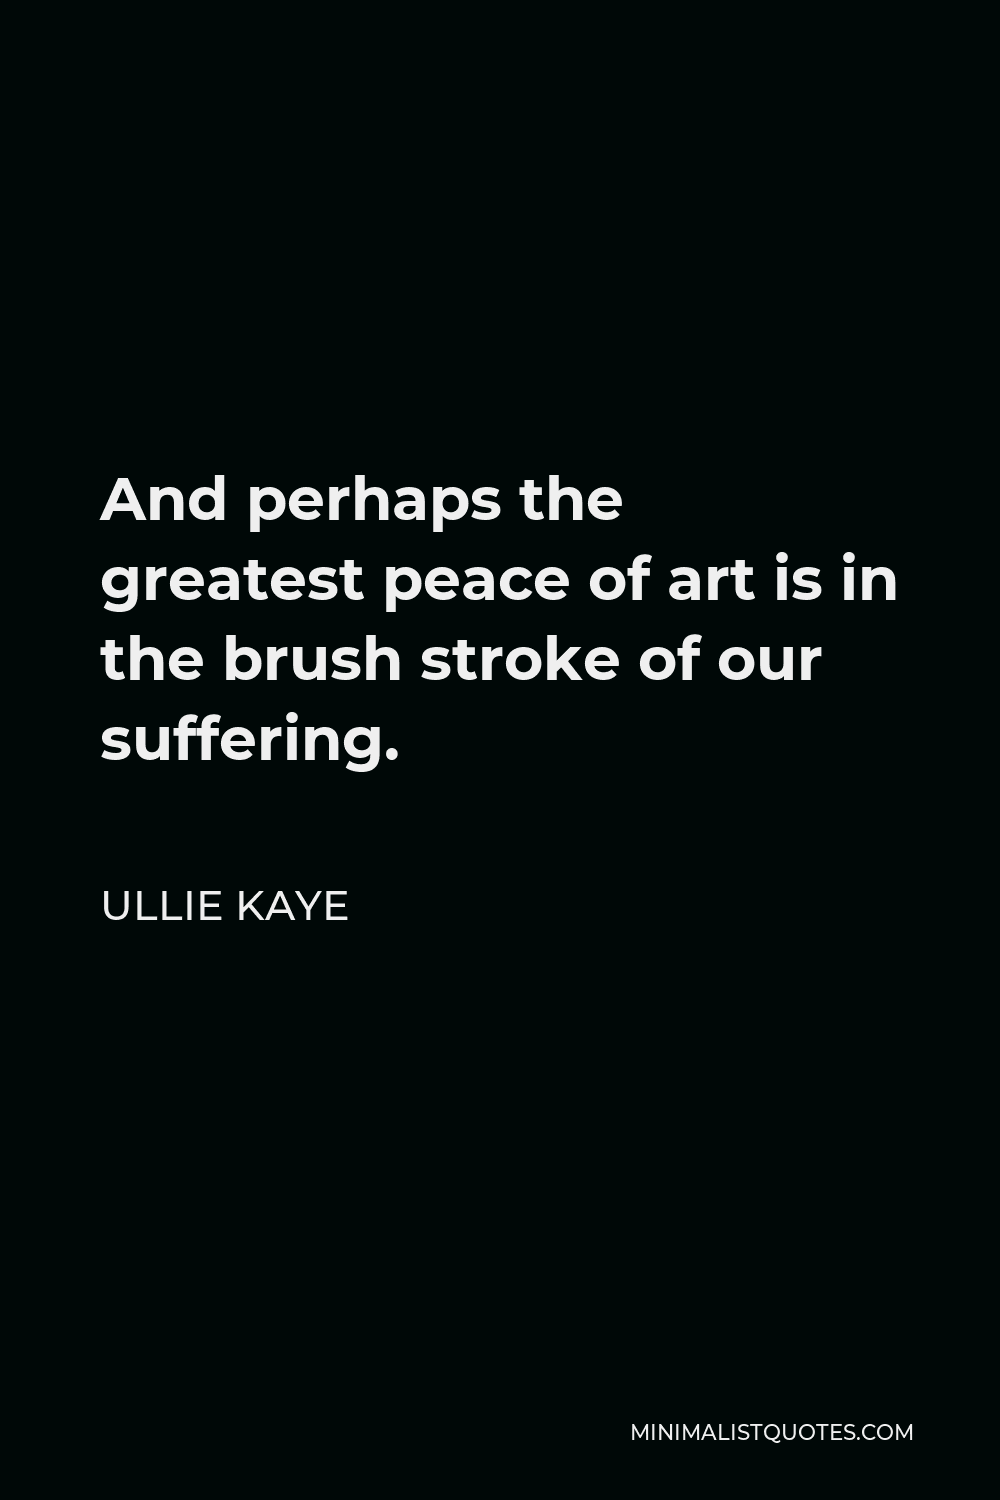 Ullie Kaye Quote - And perhaps the greatest peace of art is in the brush stroke of our suffering.